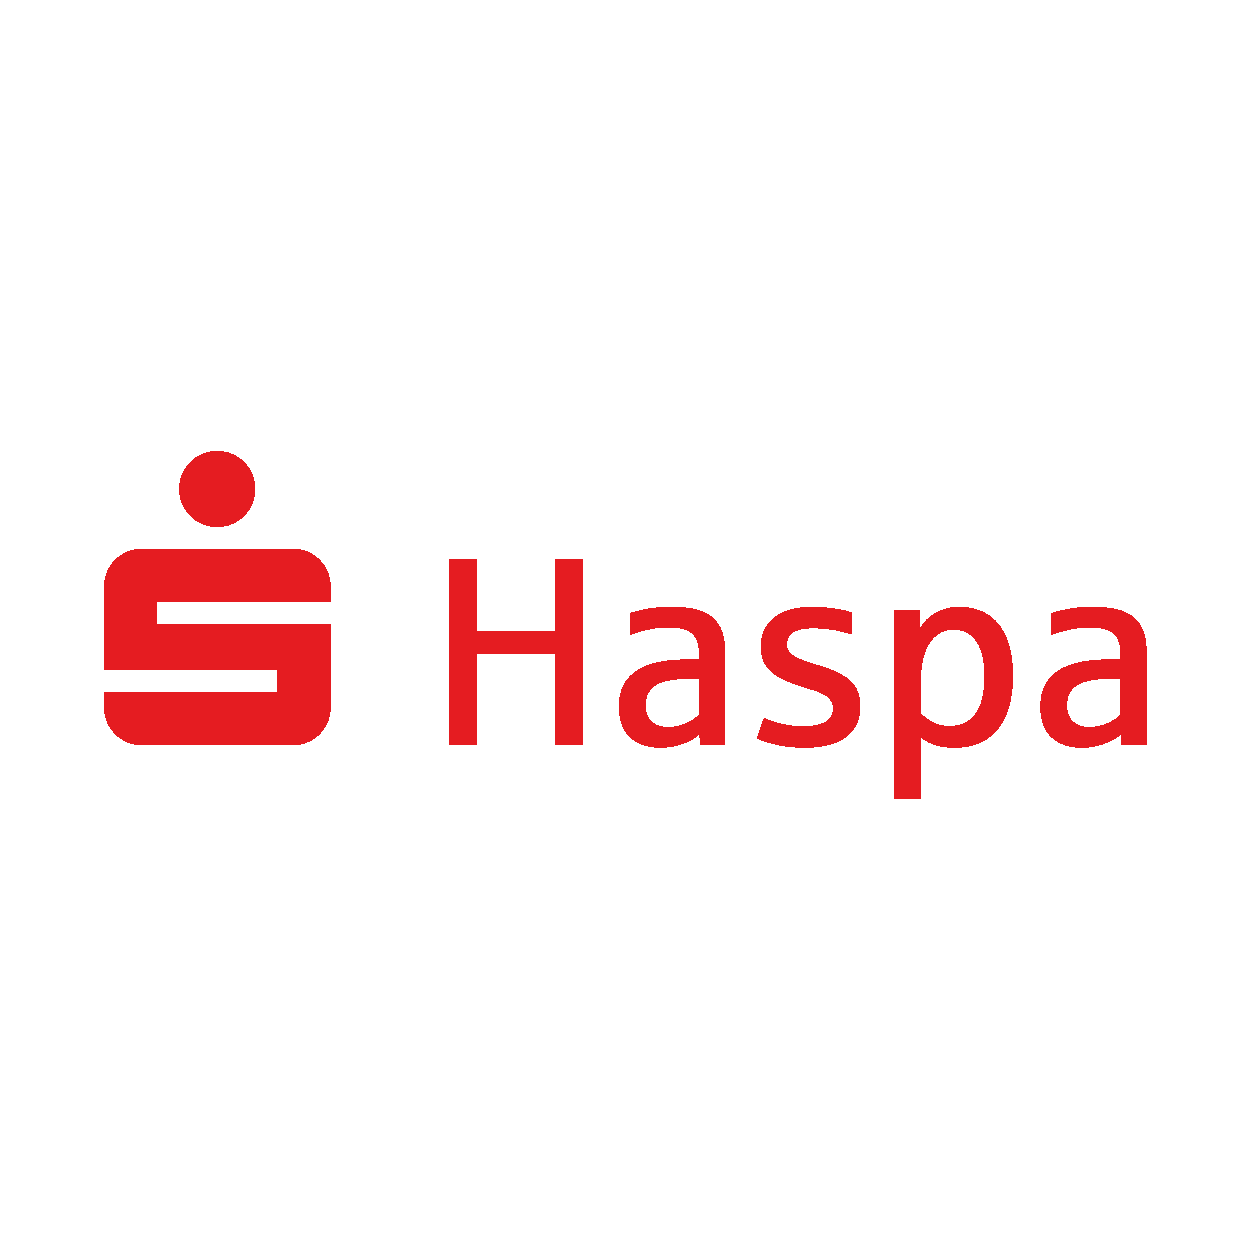 Birte Quitt, Divisional Vice President Private and Corporate Customers, HASPA